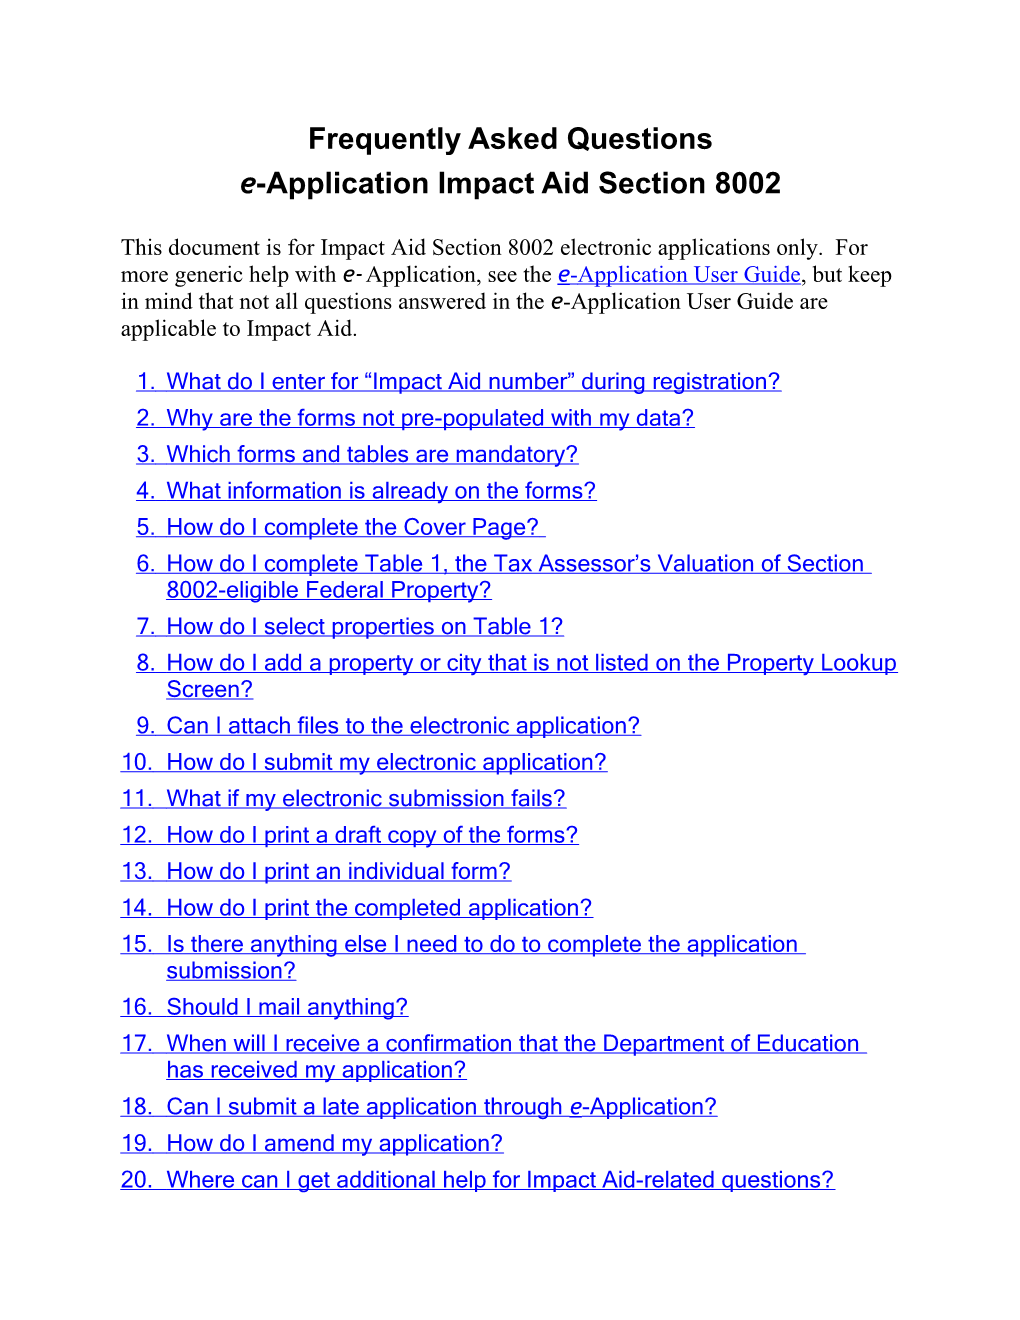 Frequently Asked Questions - Section 8002 - Impact Aid Program (MS Word)